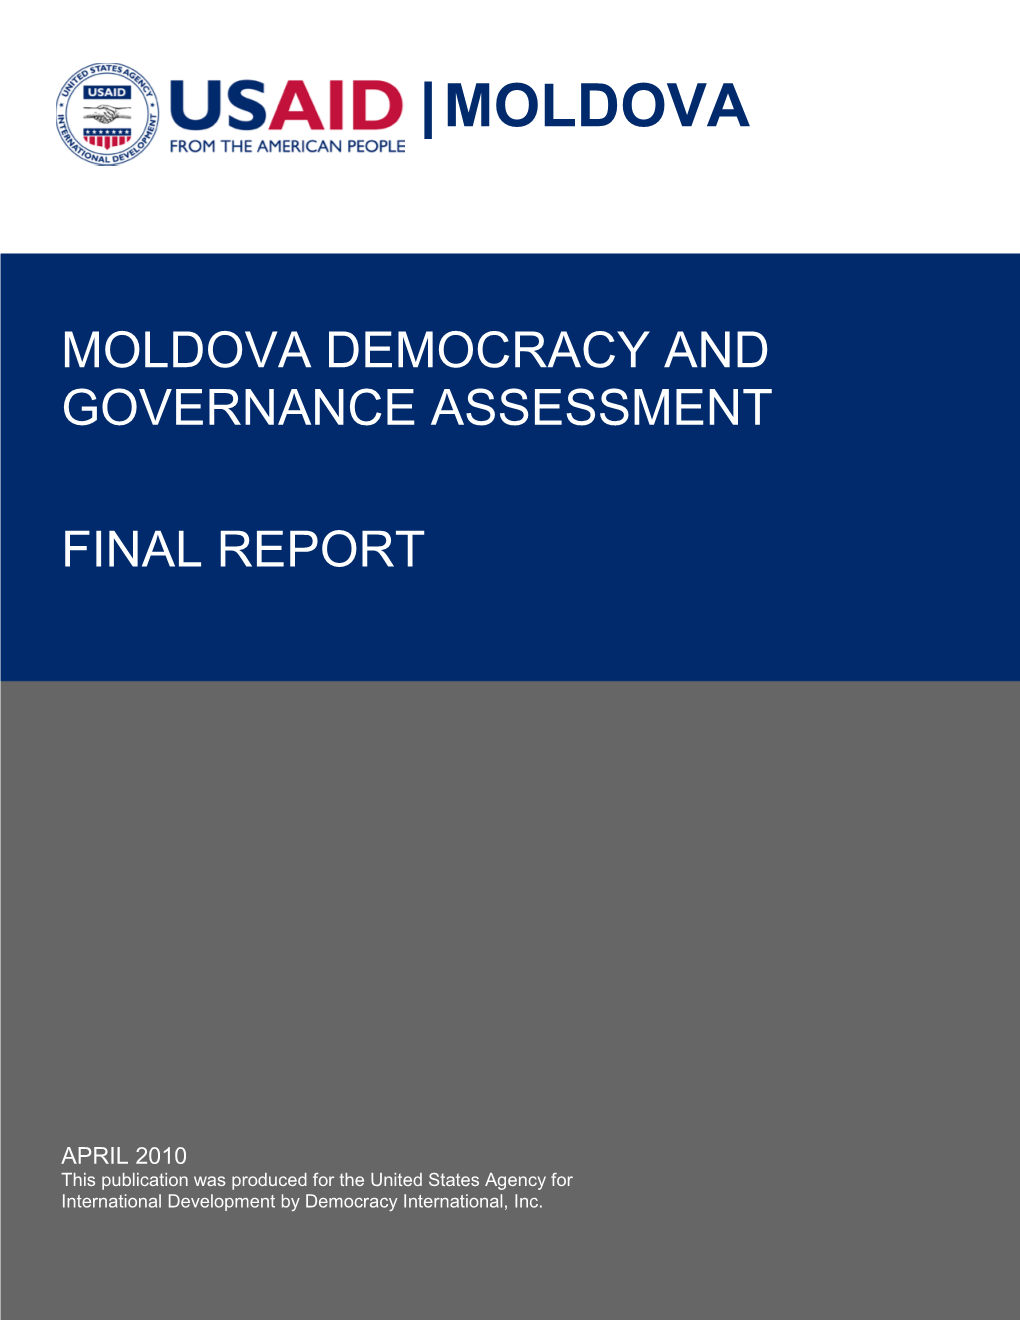 Moldova Democracy and Governance Assessment Final Report